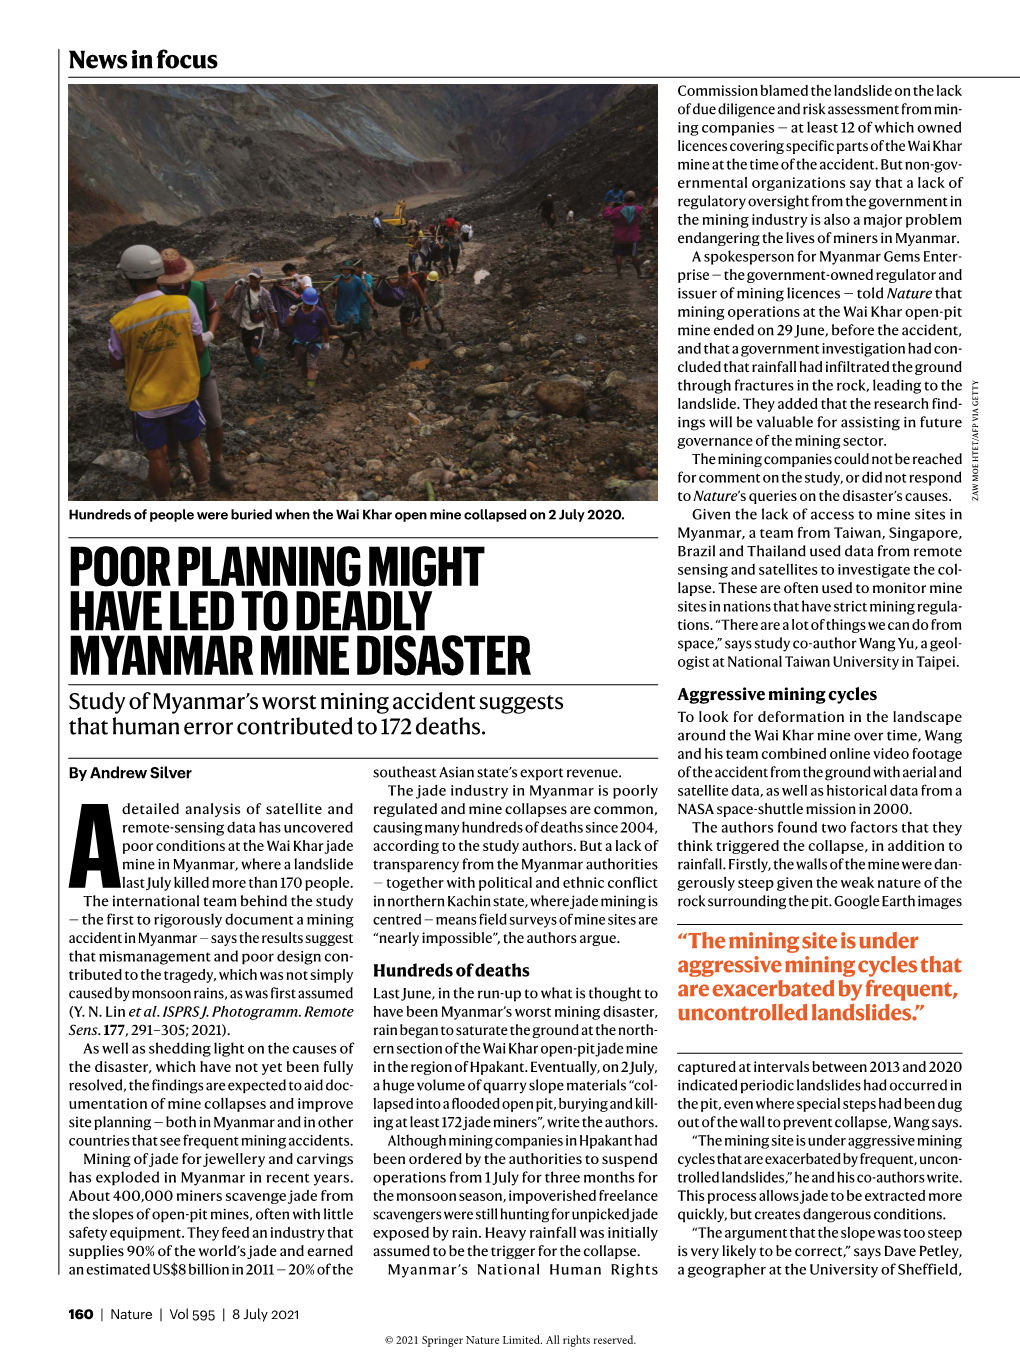 Poor Planning Might Have Led to Deadly Myanmar Mine